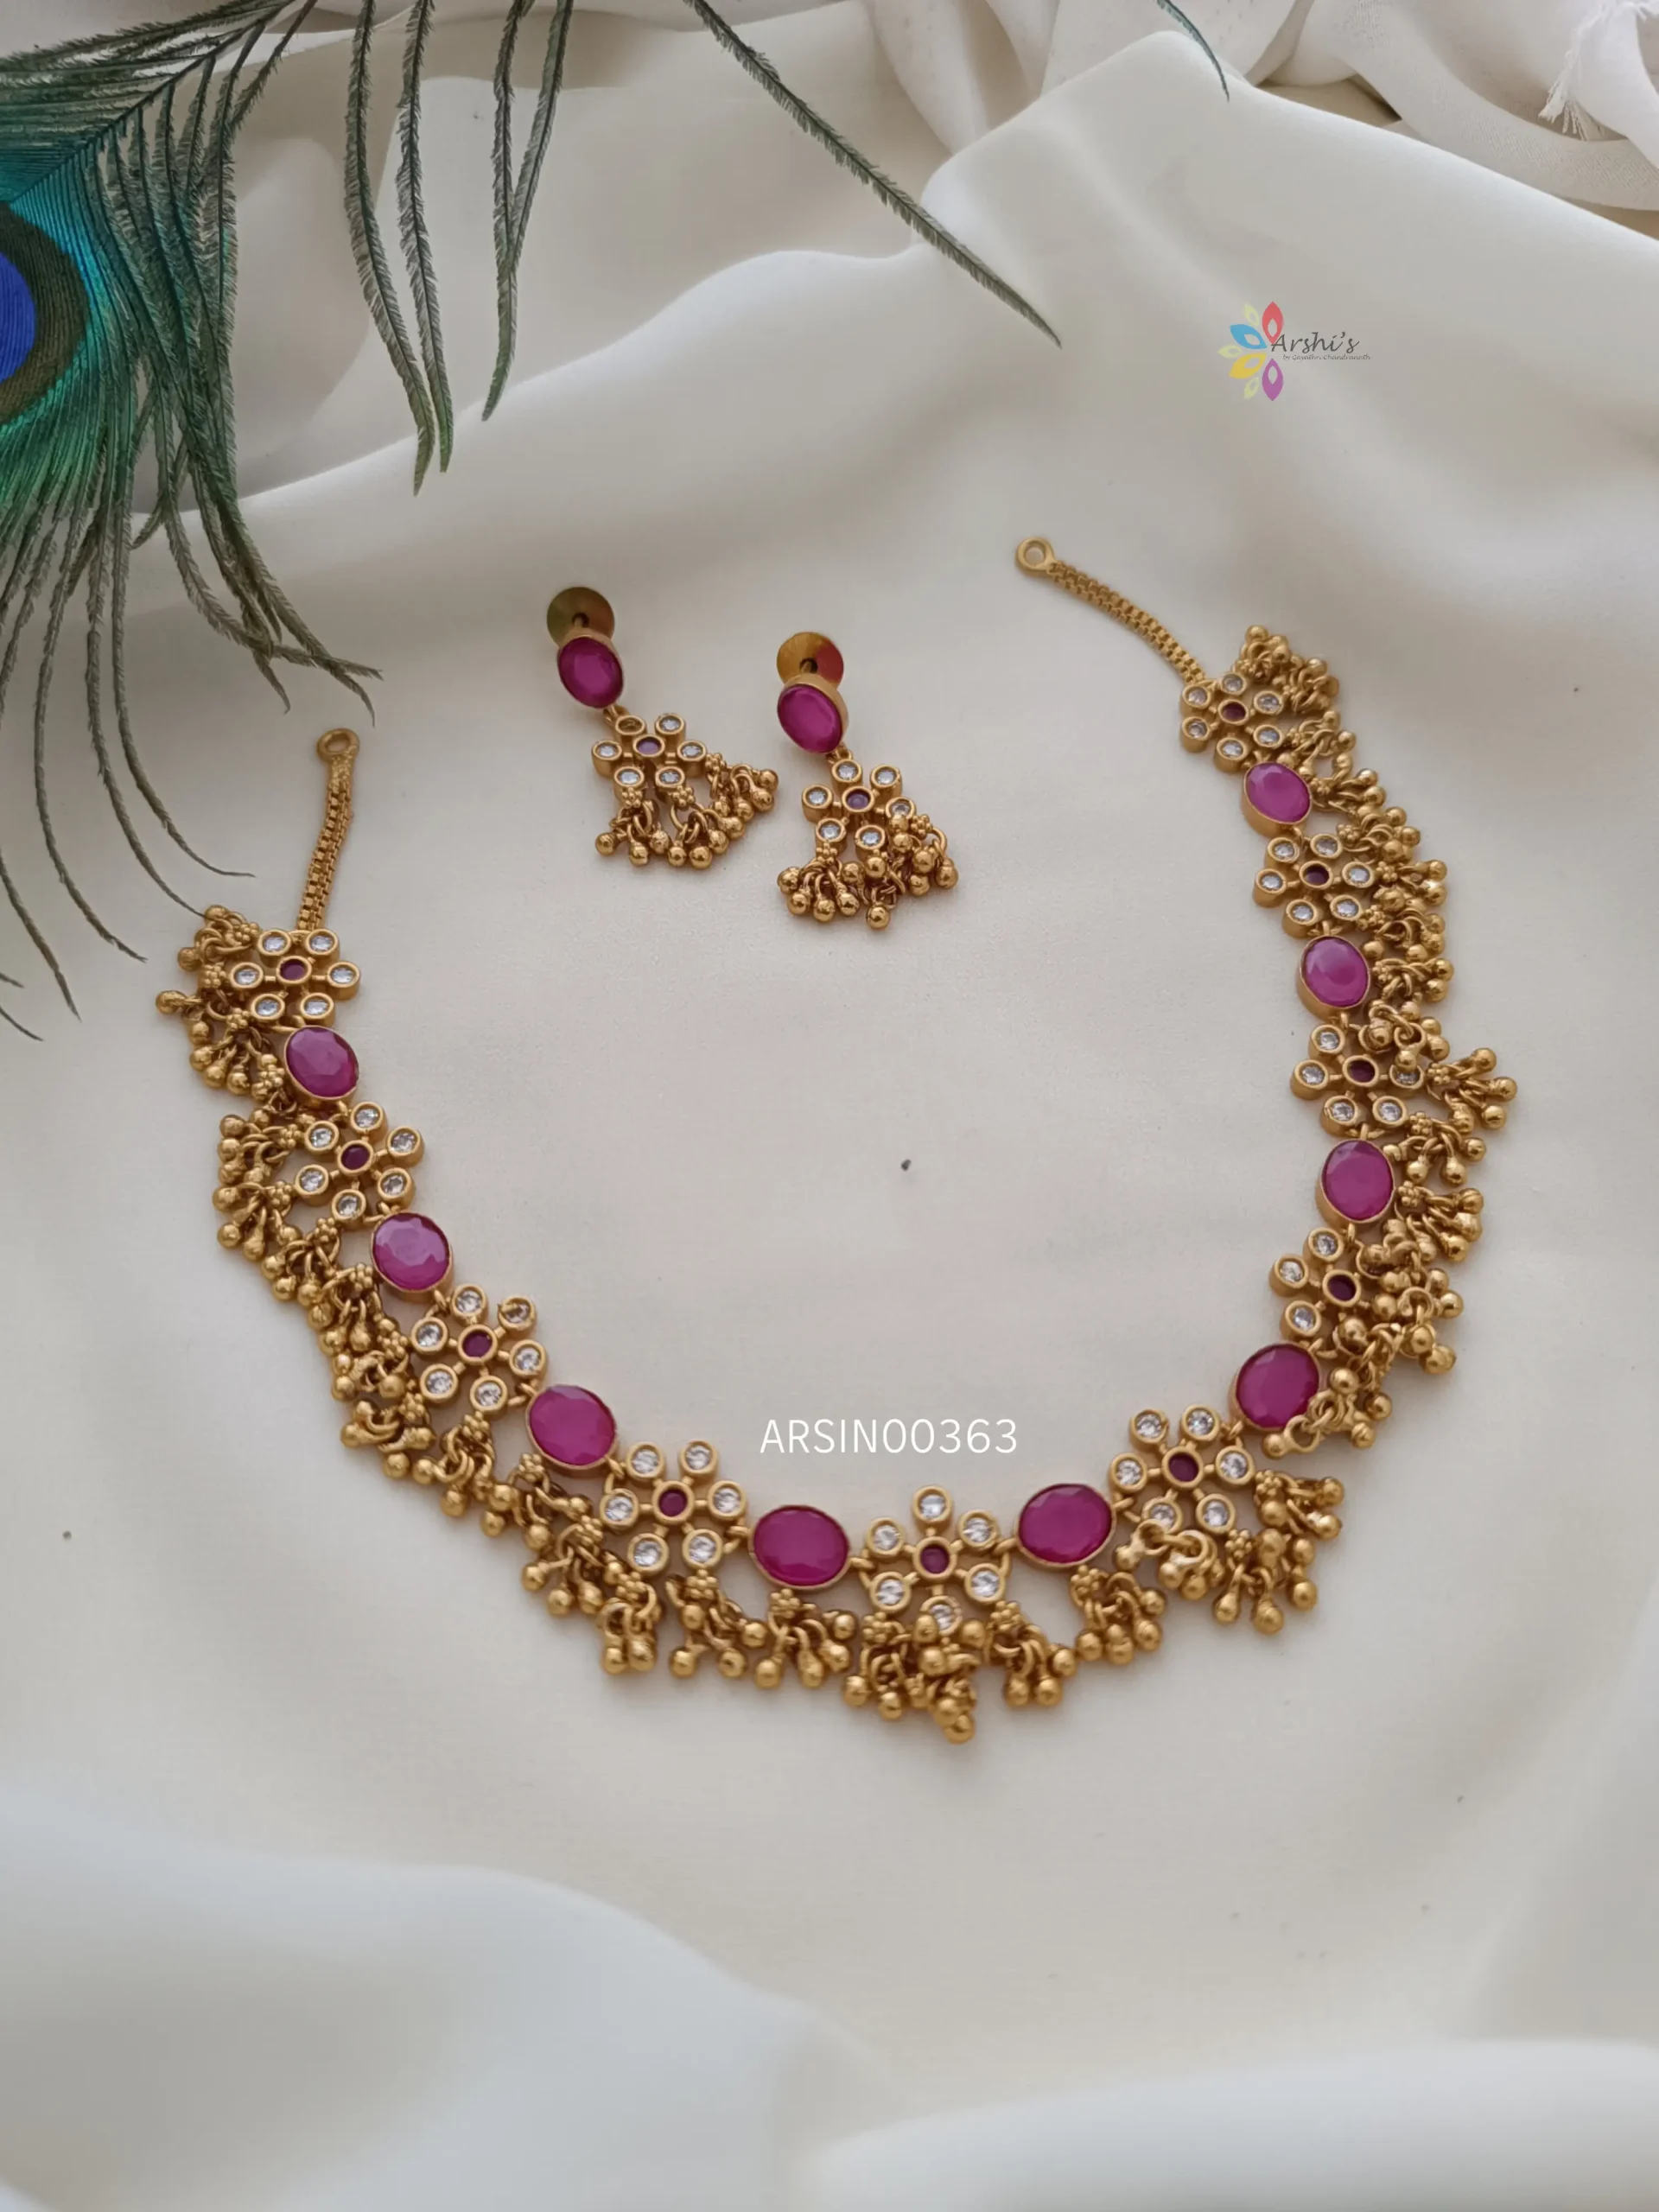 Adorable Kemp Stone Small Gold Beads Necklace